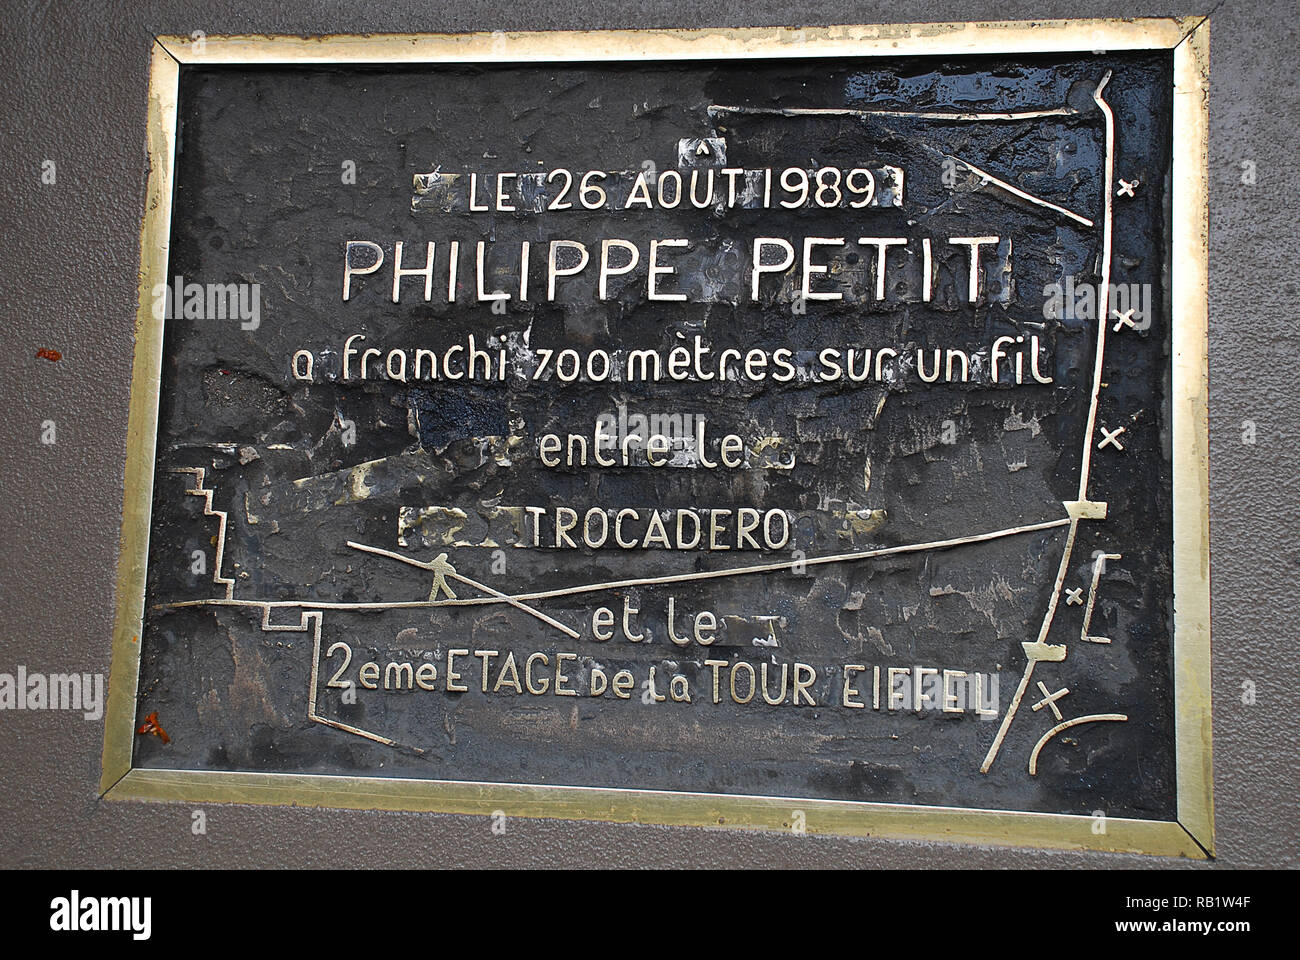 Tour Eiffel - Plaque of Philippe Petit. Philippe Petit is a French high-wire artist, commemorative plaque Stock Photo